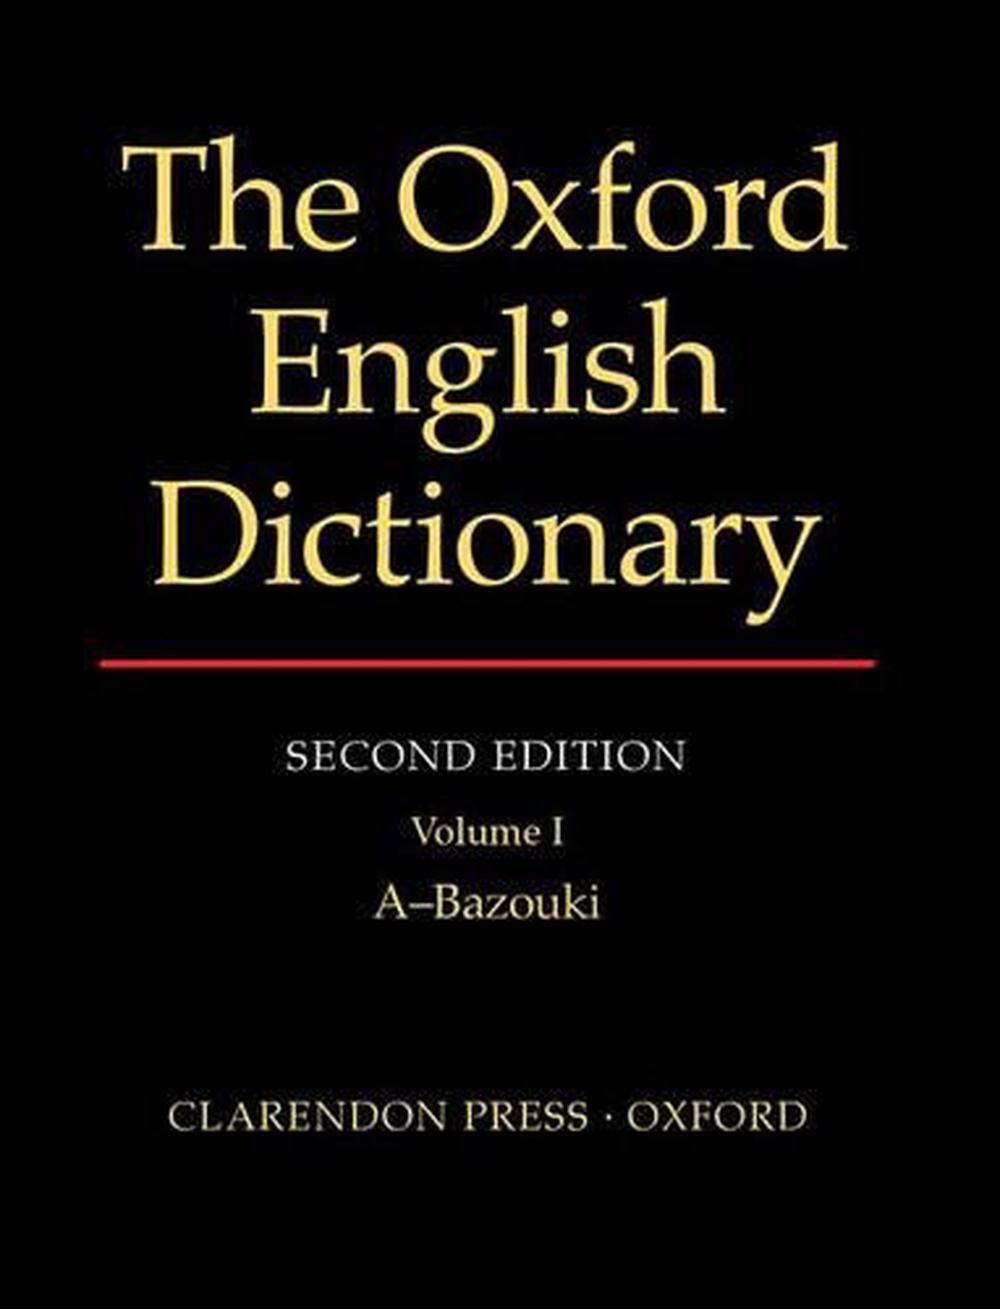 oxford dictionary of english